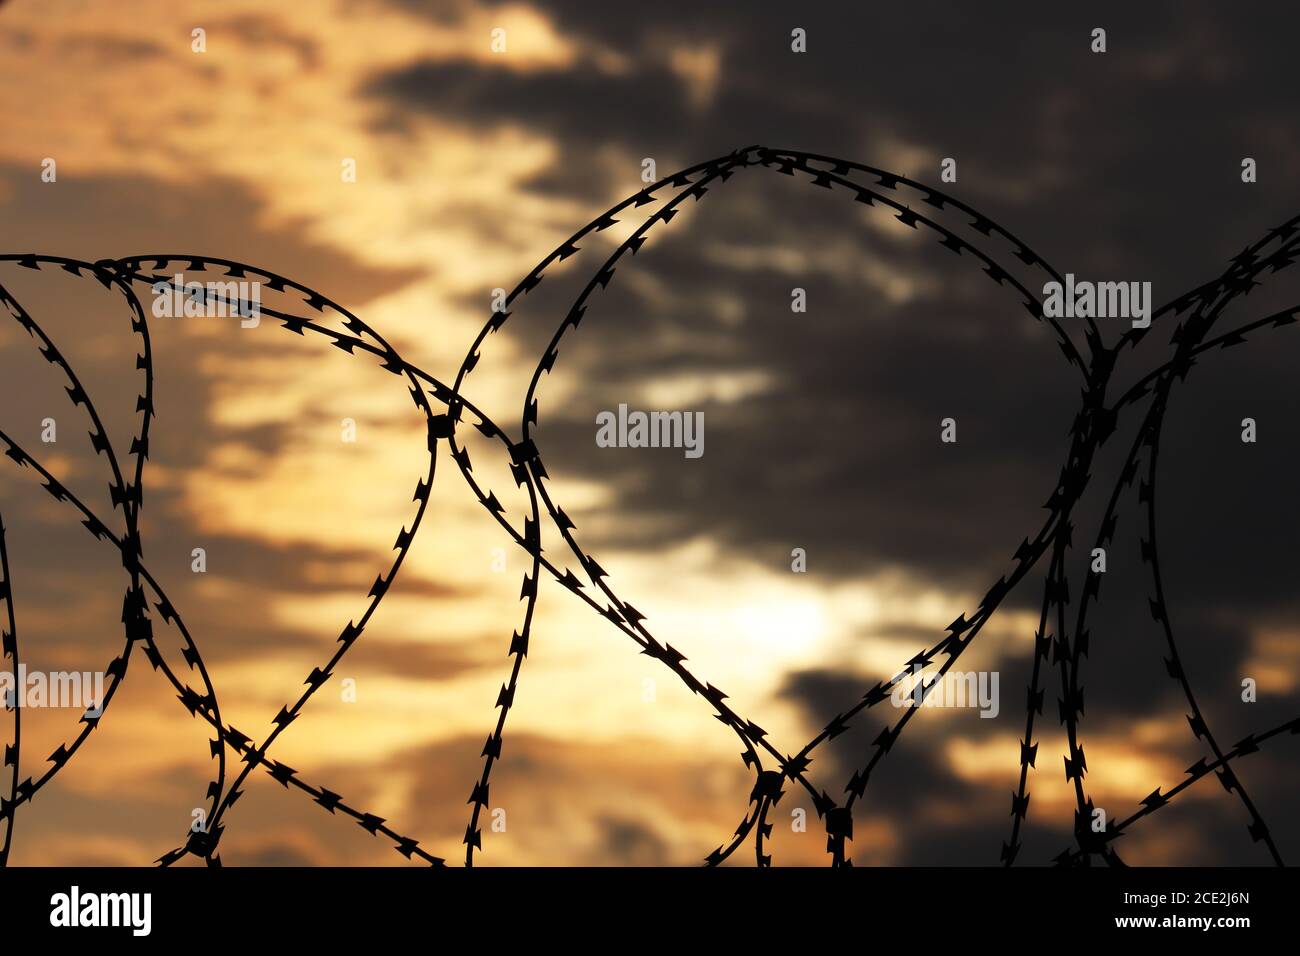 Barbed wire on dramatic sky background at sunset. Concept of boundary, prison, war or immigration Stock Photo